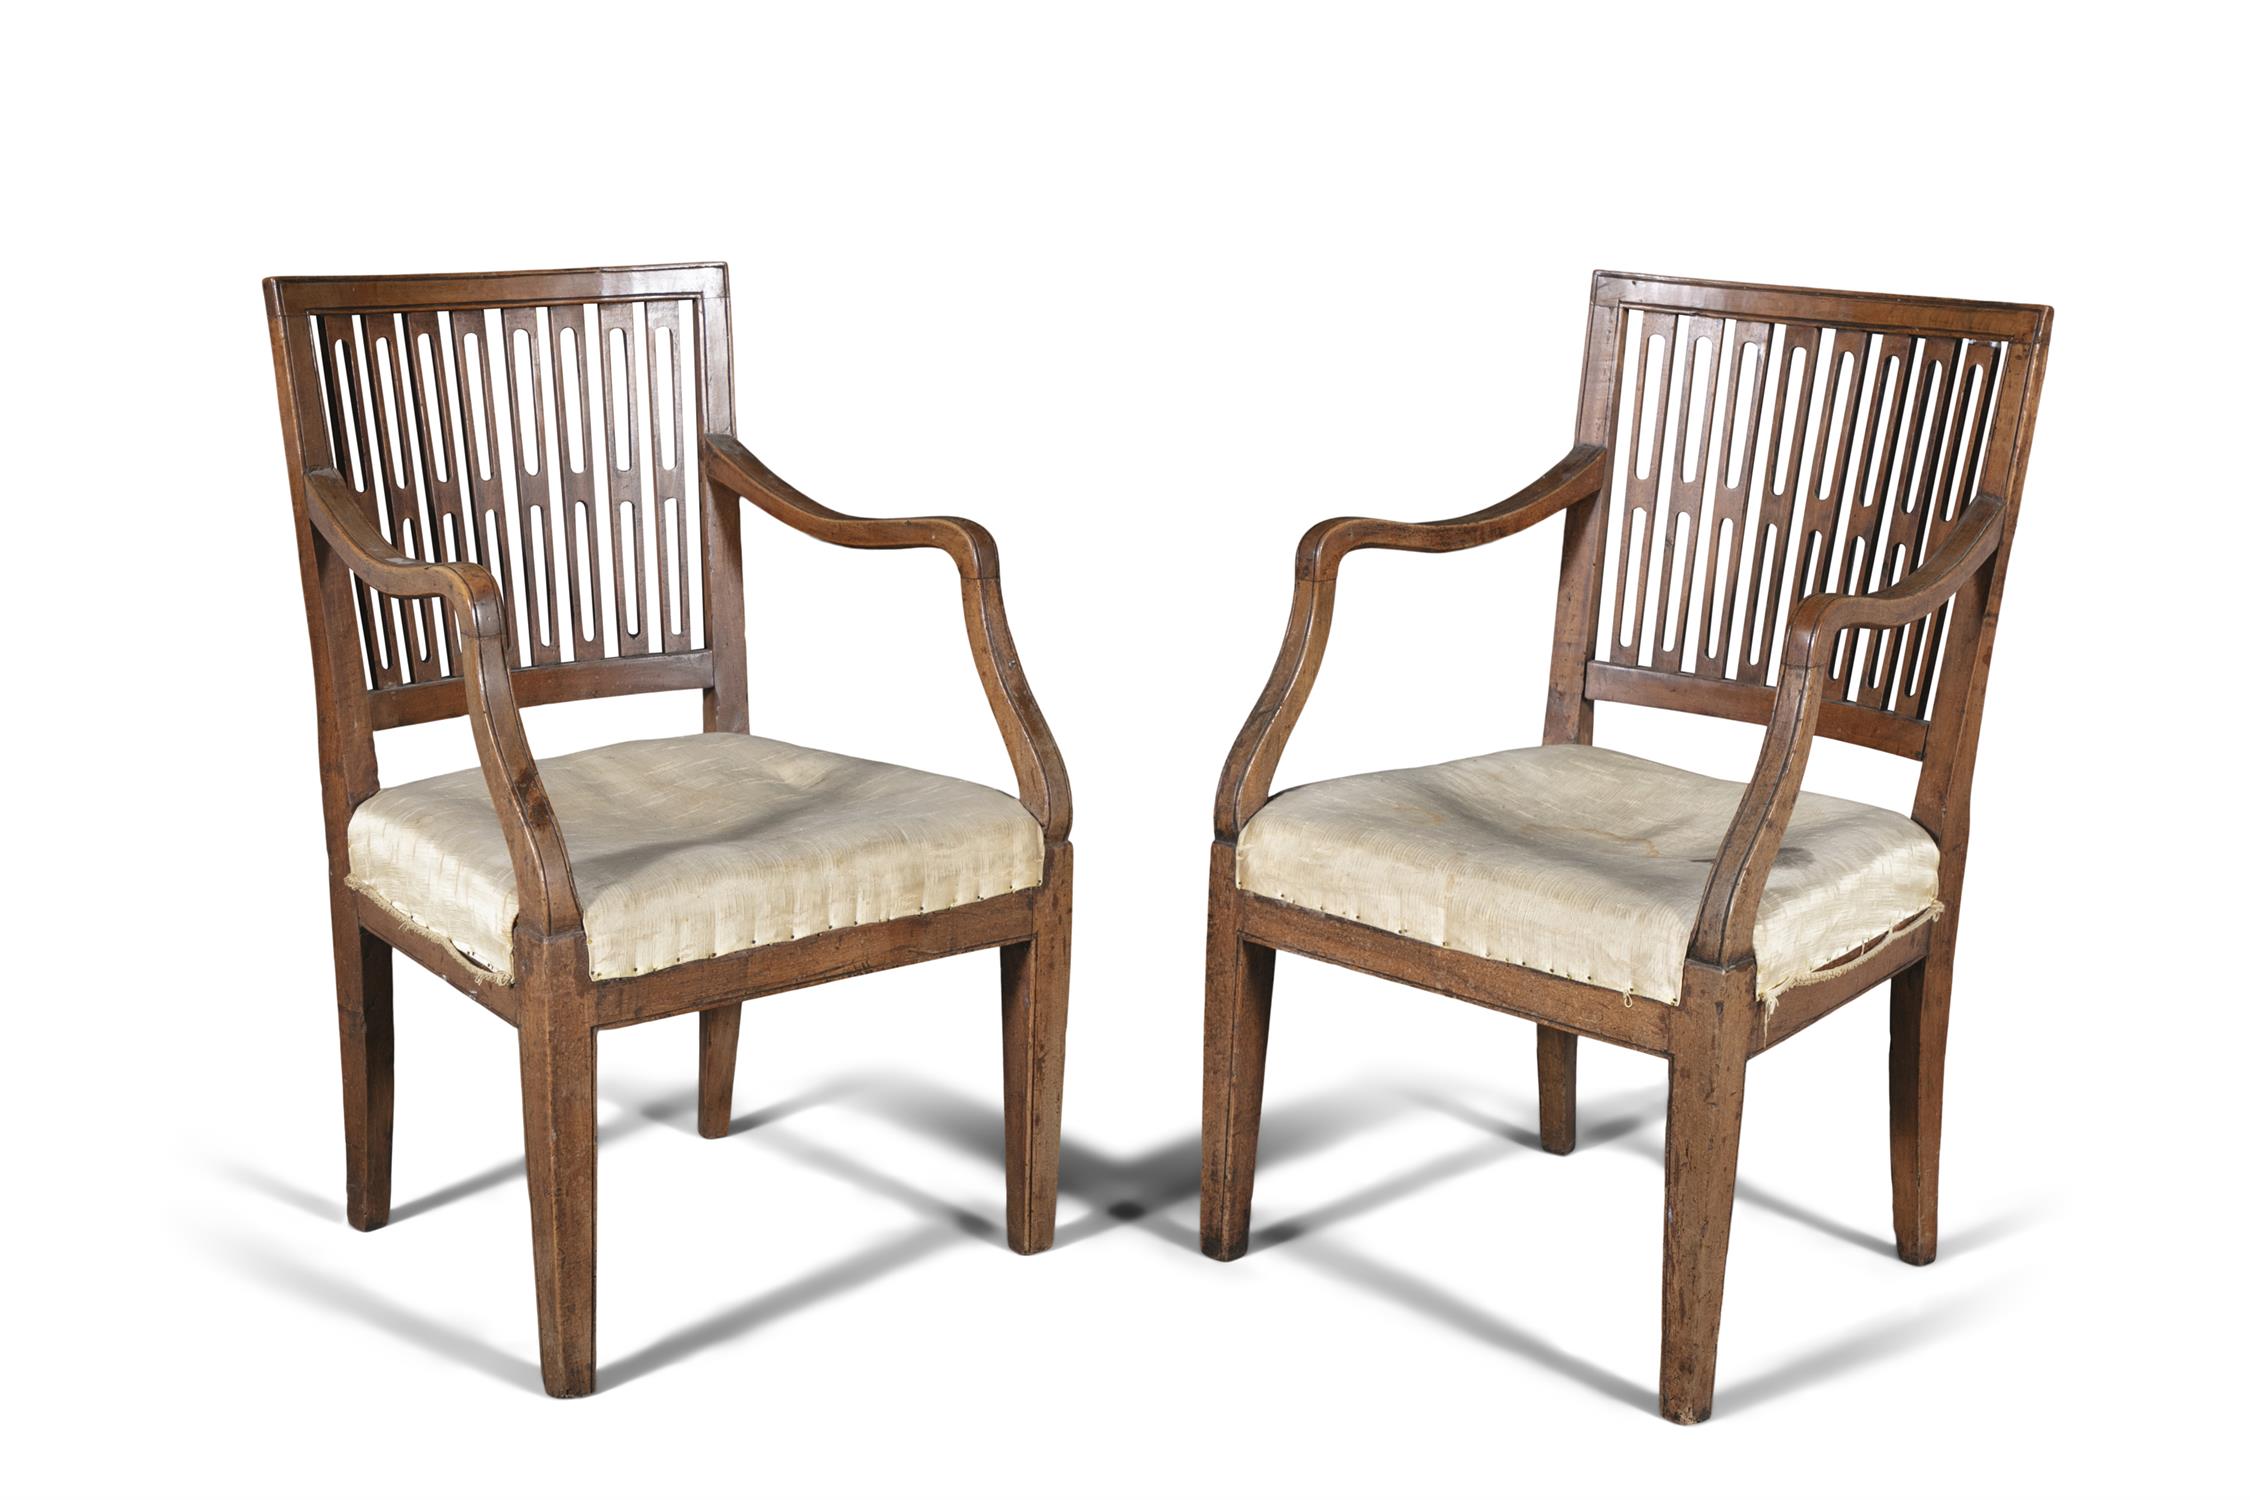 A PAIR OF GEORGE III MAHOGANY OPEN ARMCHAIRS, LATE 18TH CENTURY, the square backs filled with